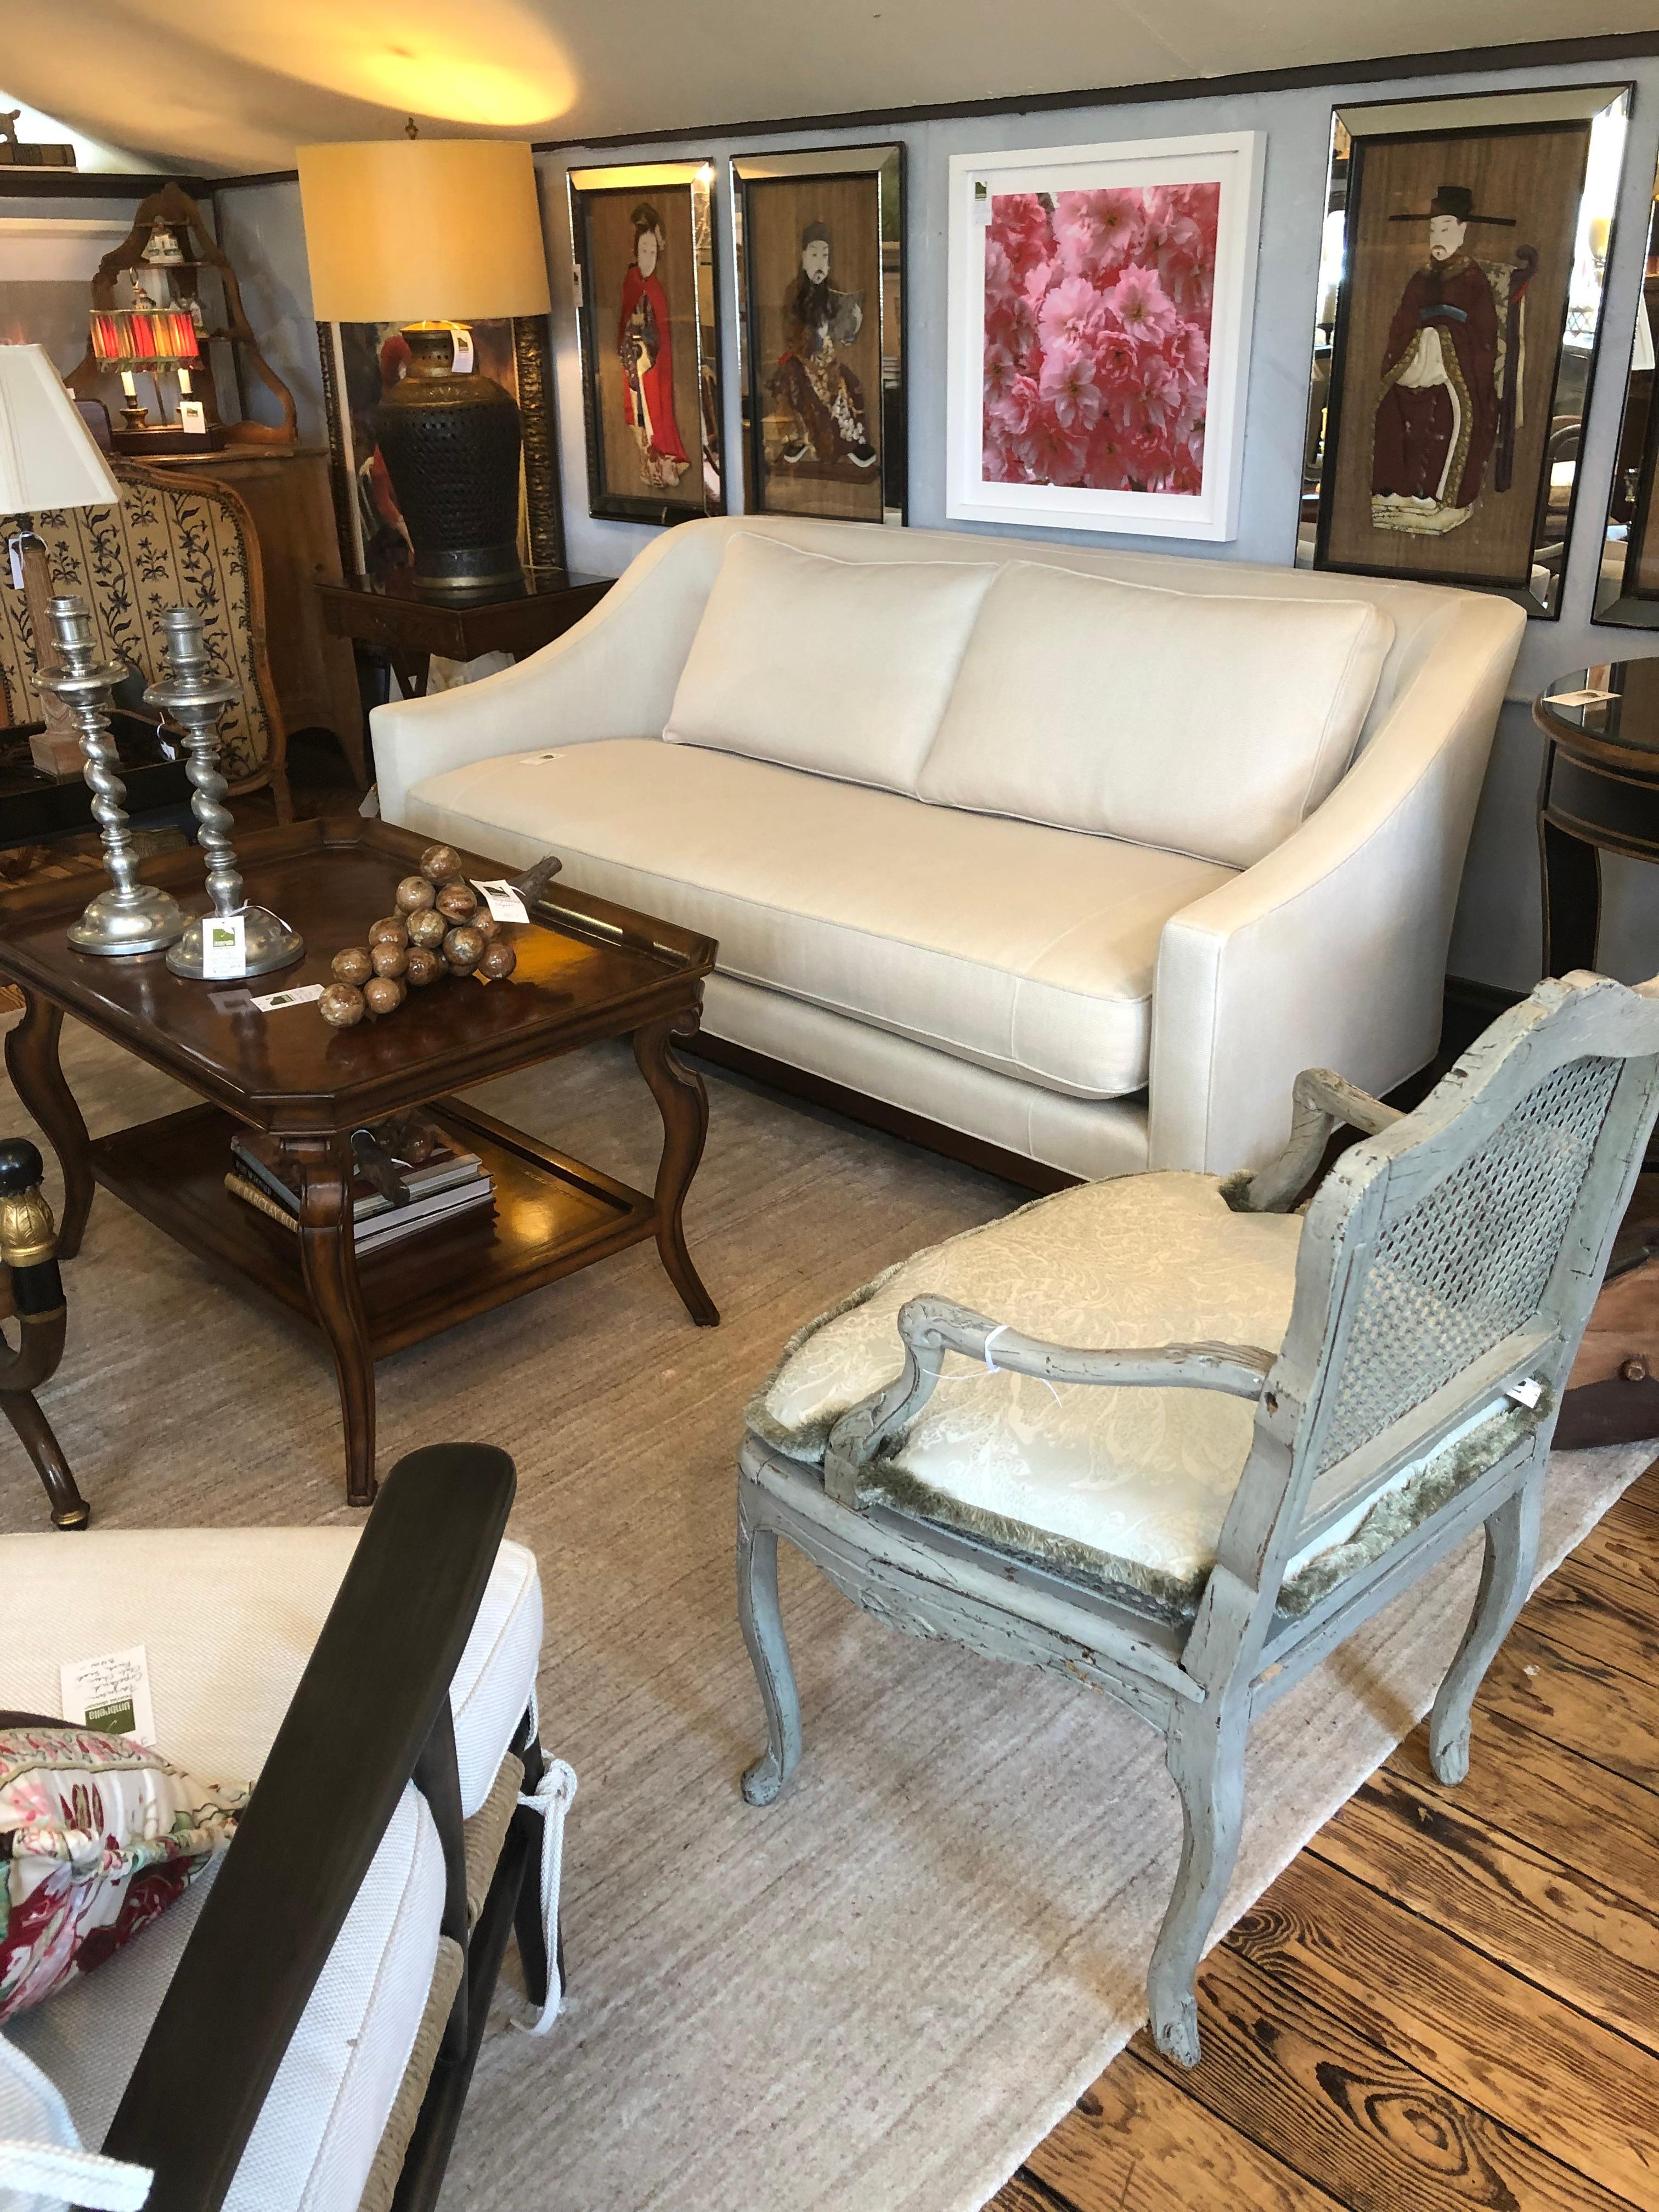 Like new stunning glamorous off white upholstered sofa by Baker having single seat cushion and two back cushions with subtle buttons on the inside back.
74 W at back
77.5 W arm to arm
interior seat 68 W, 29 D
seat height 18.25.